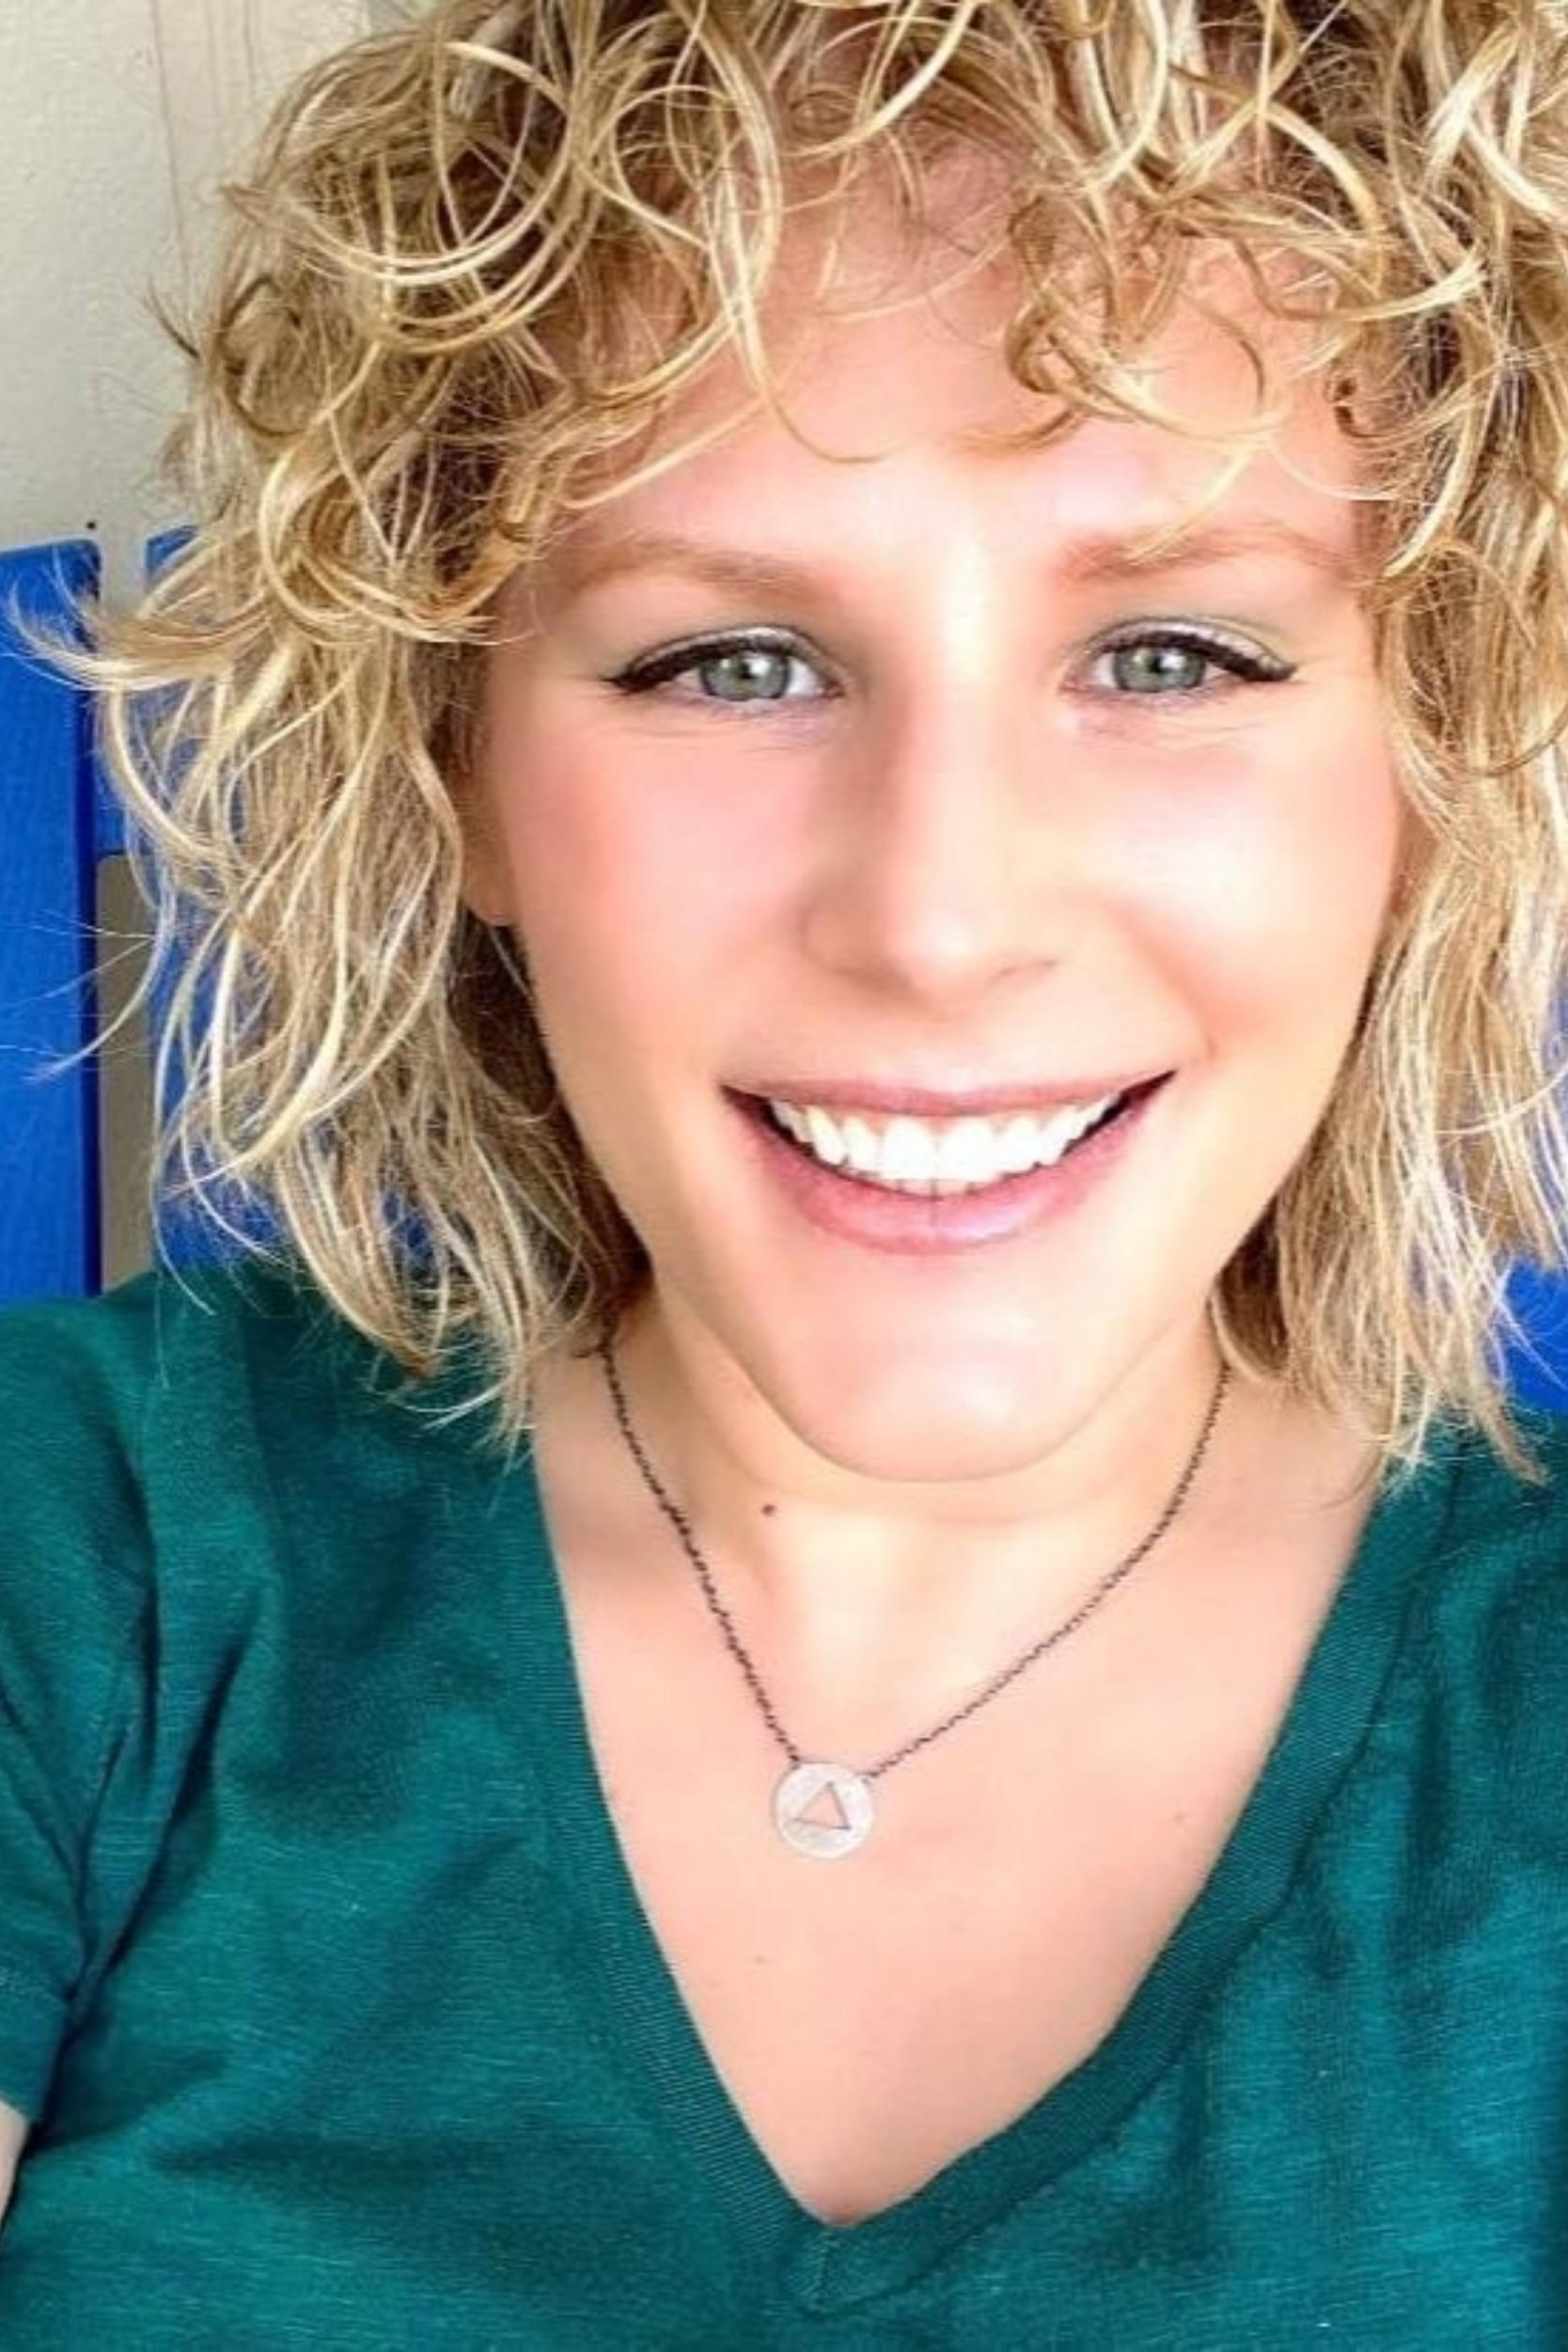 Head shot image of Nina Brandin. They are the owner of NINAB Jewelry. They have short curly hair, green eyes, and is wearing a green shirt with a necklace.  